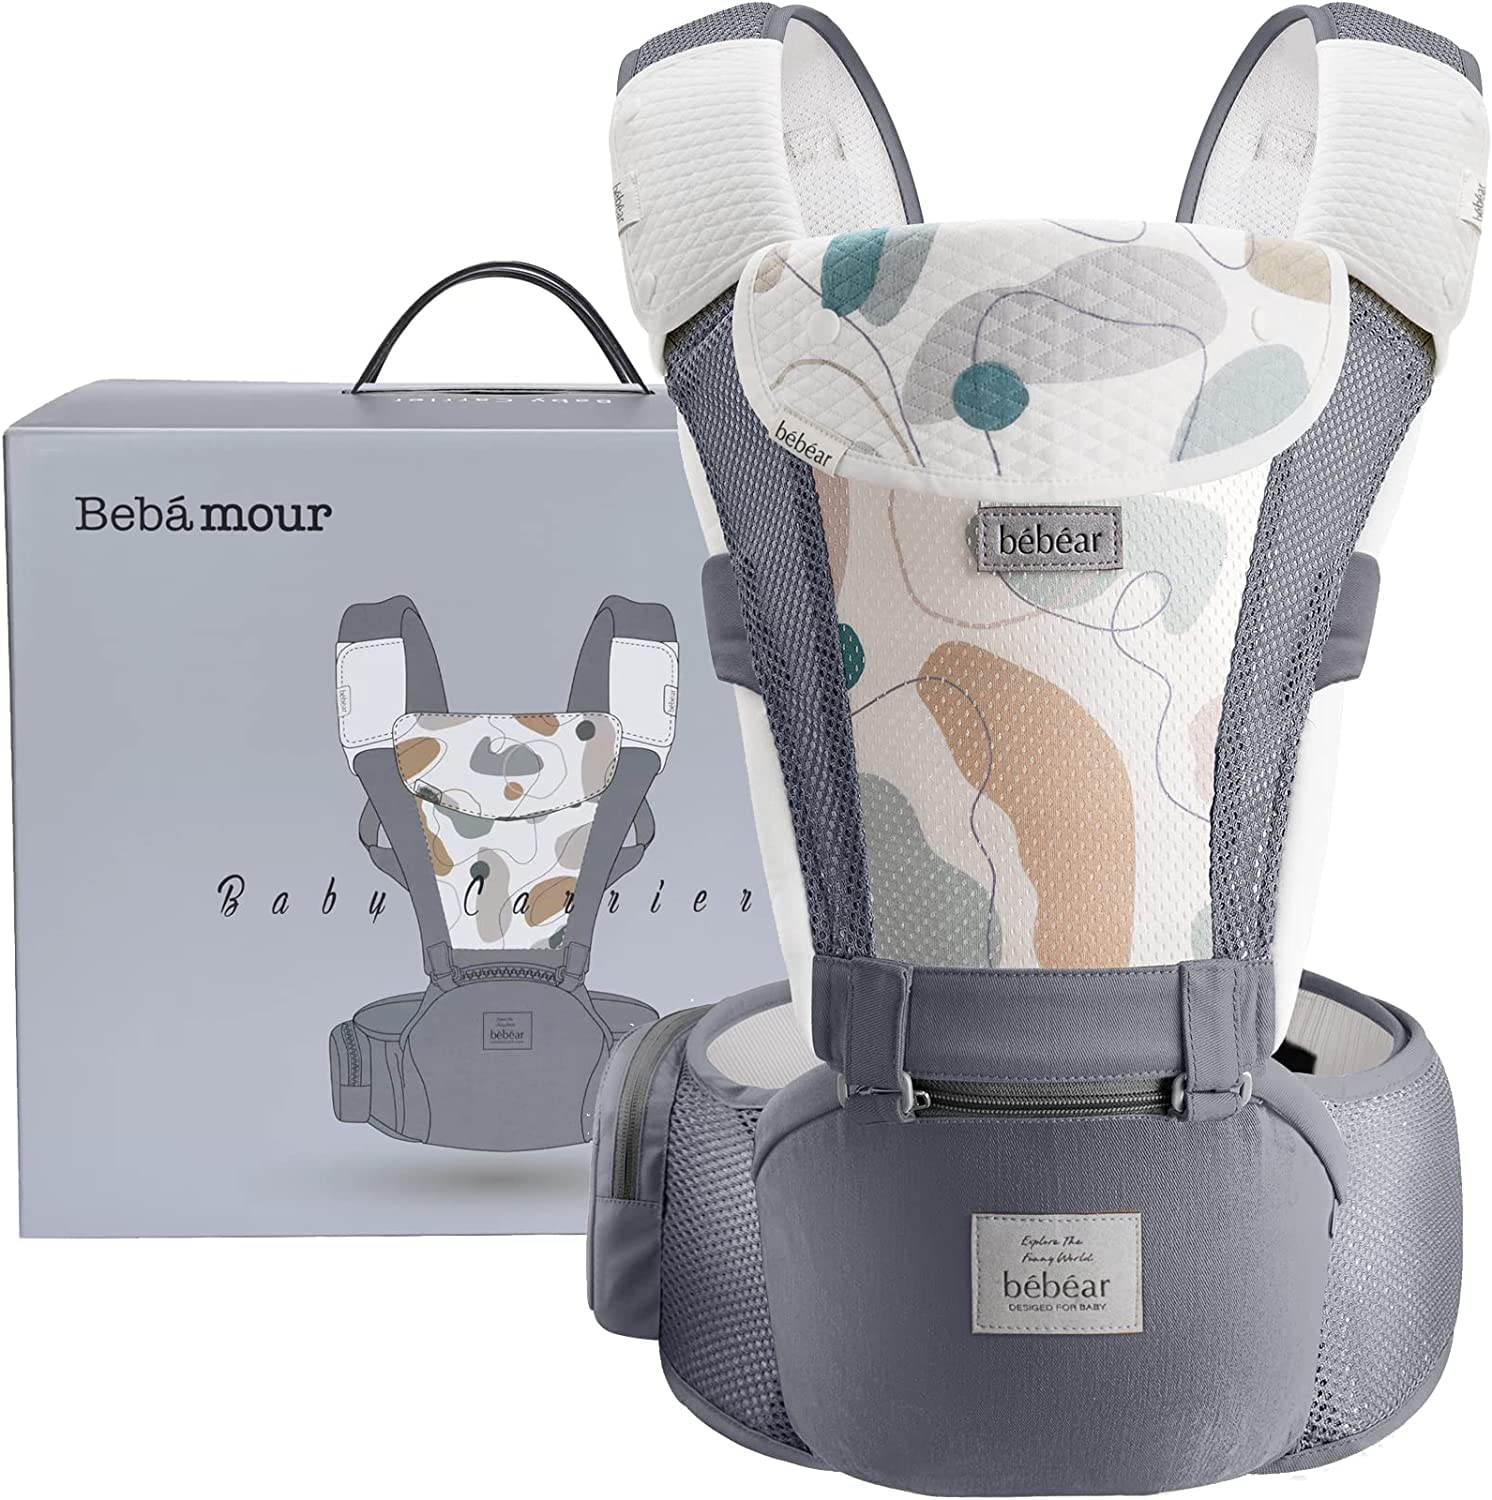 Bebamour Baby Carrier Newborn Front and Back Carry Baby Carrier Newborn to Toddler Baby Hip Carrier with Head Hood & 3 Pieces Teething Pads (New Grey)